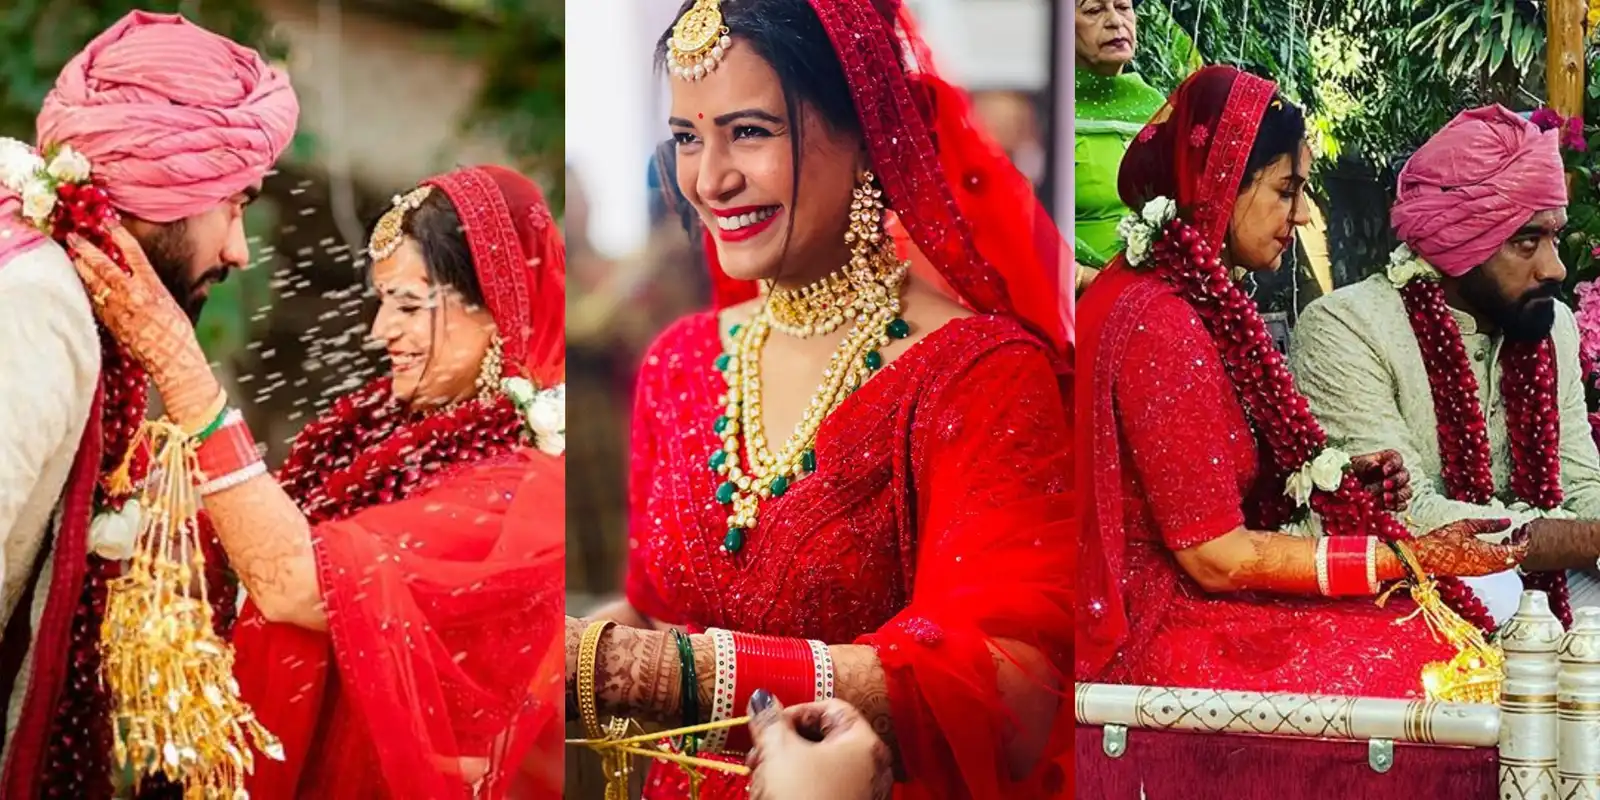 Mona Singh Ties The Knot With Shyam Gopalan, Shares Pictures From The Wedding!